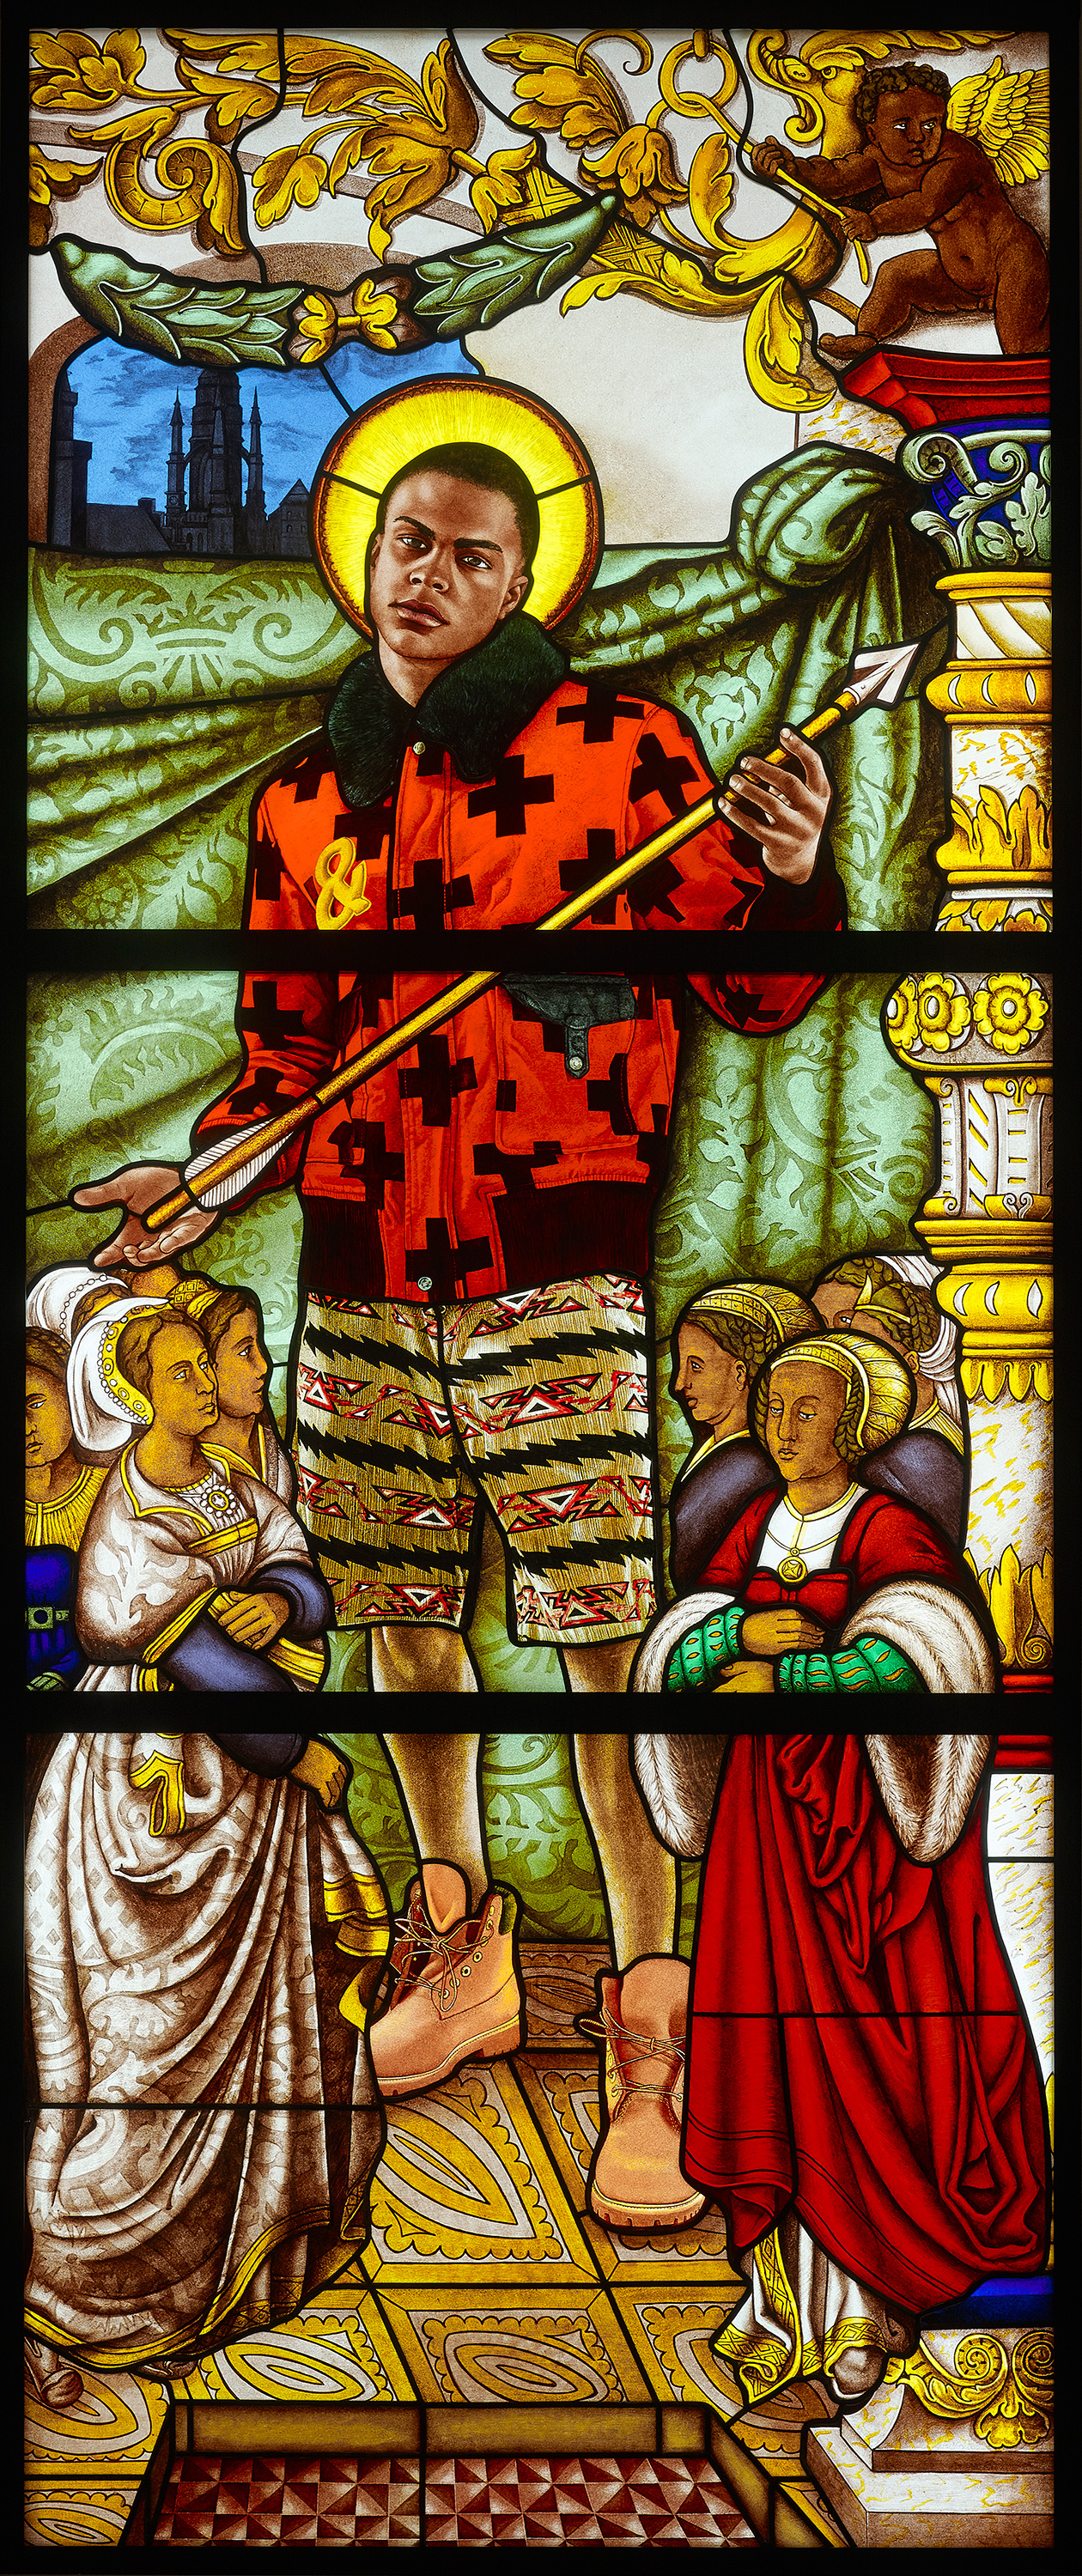 Kehinde Wiley | Stained Glass | Saint Ursula and the Virgin Martyrs, 2014 Stained Glass. | 4